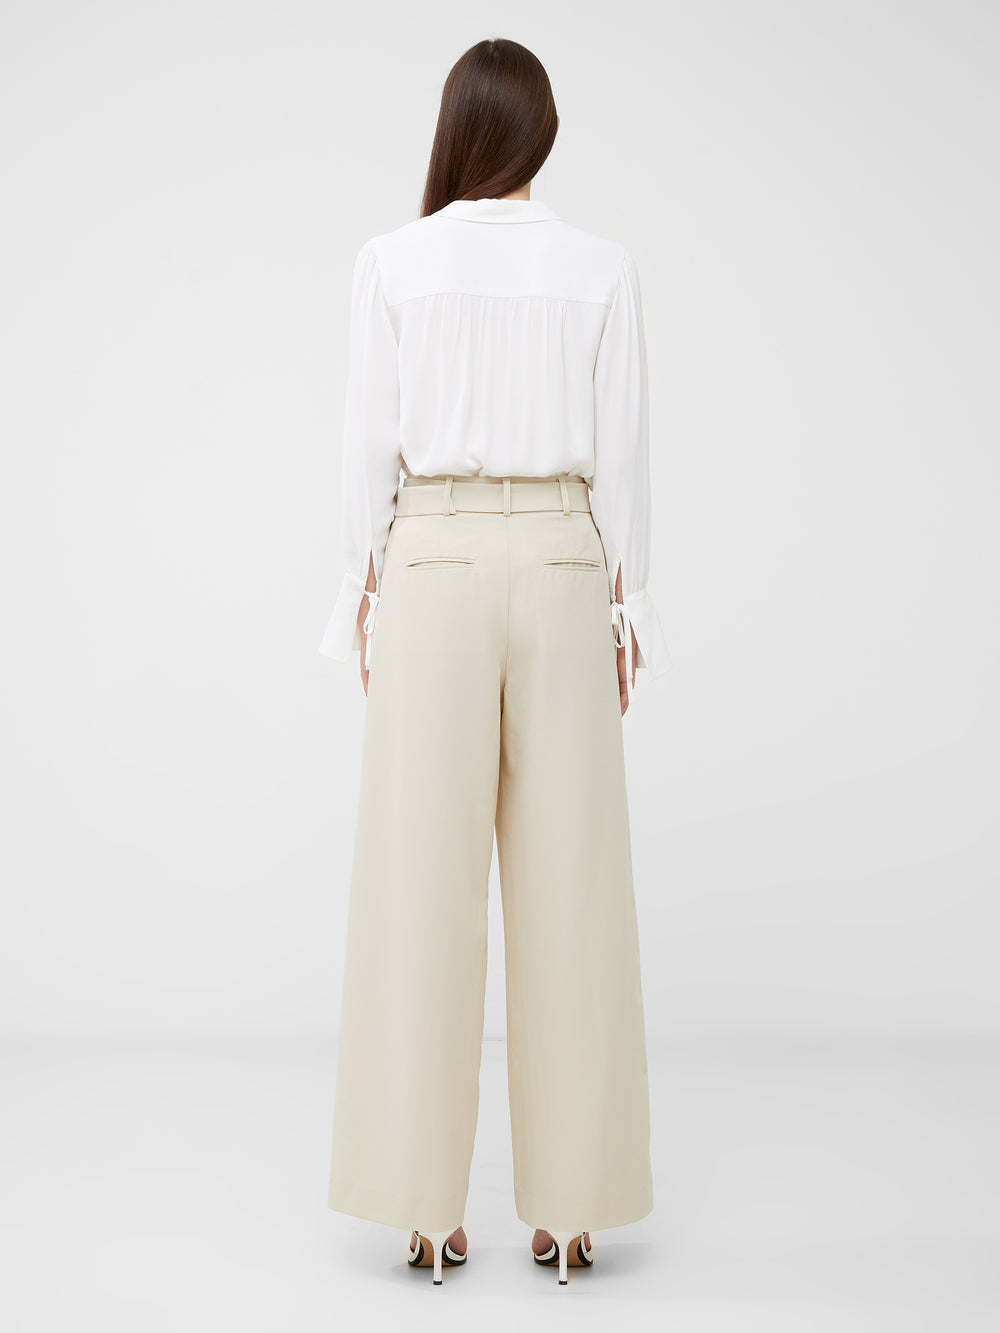 Everly Suiting Trousers Oyster Gray | French Connection UK